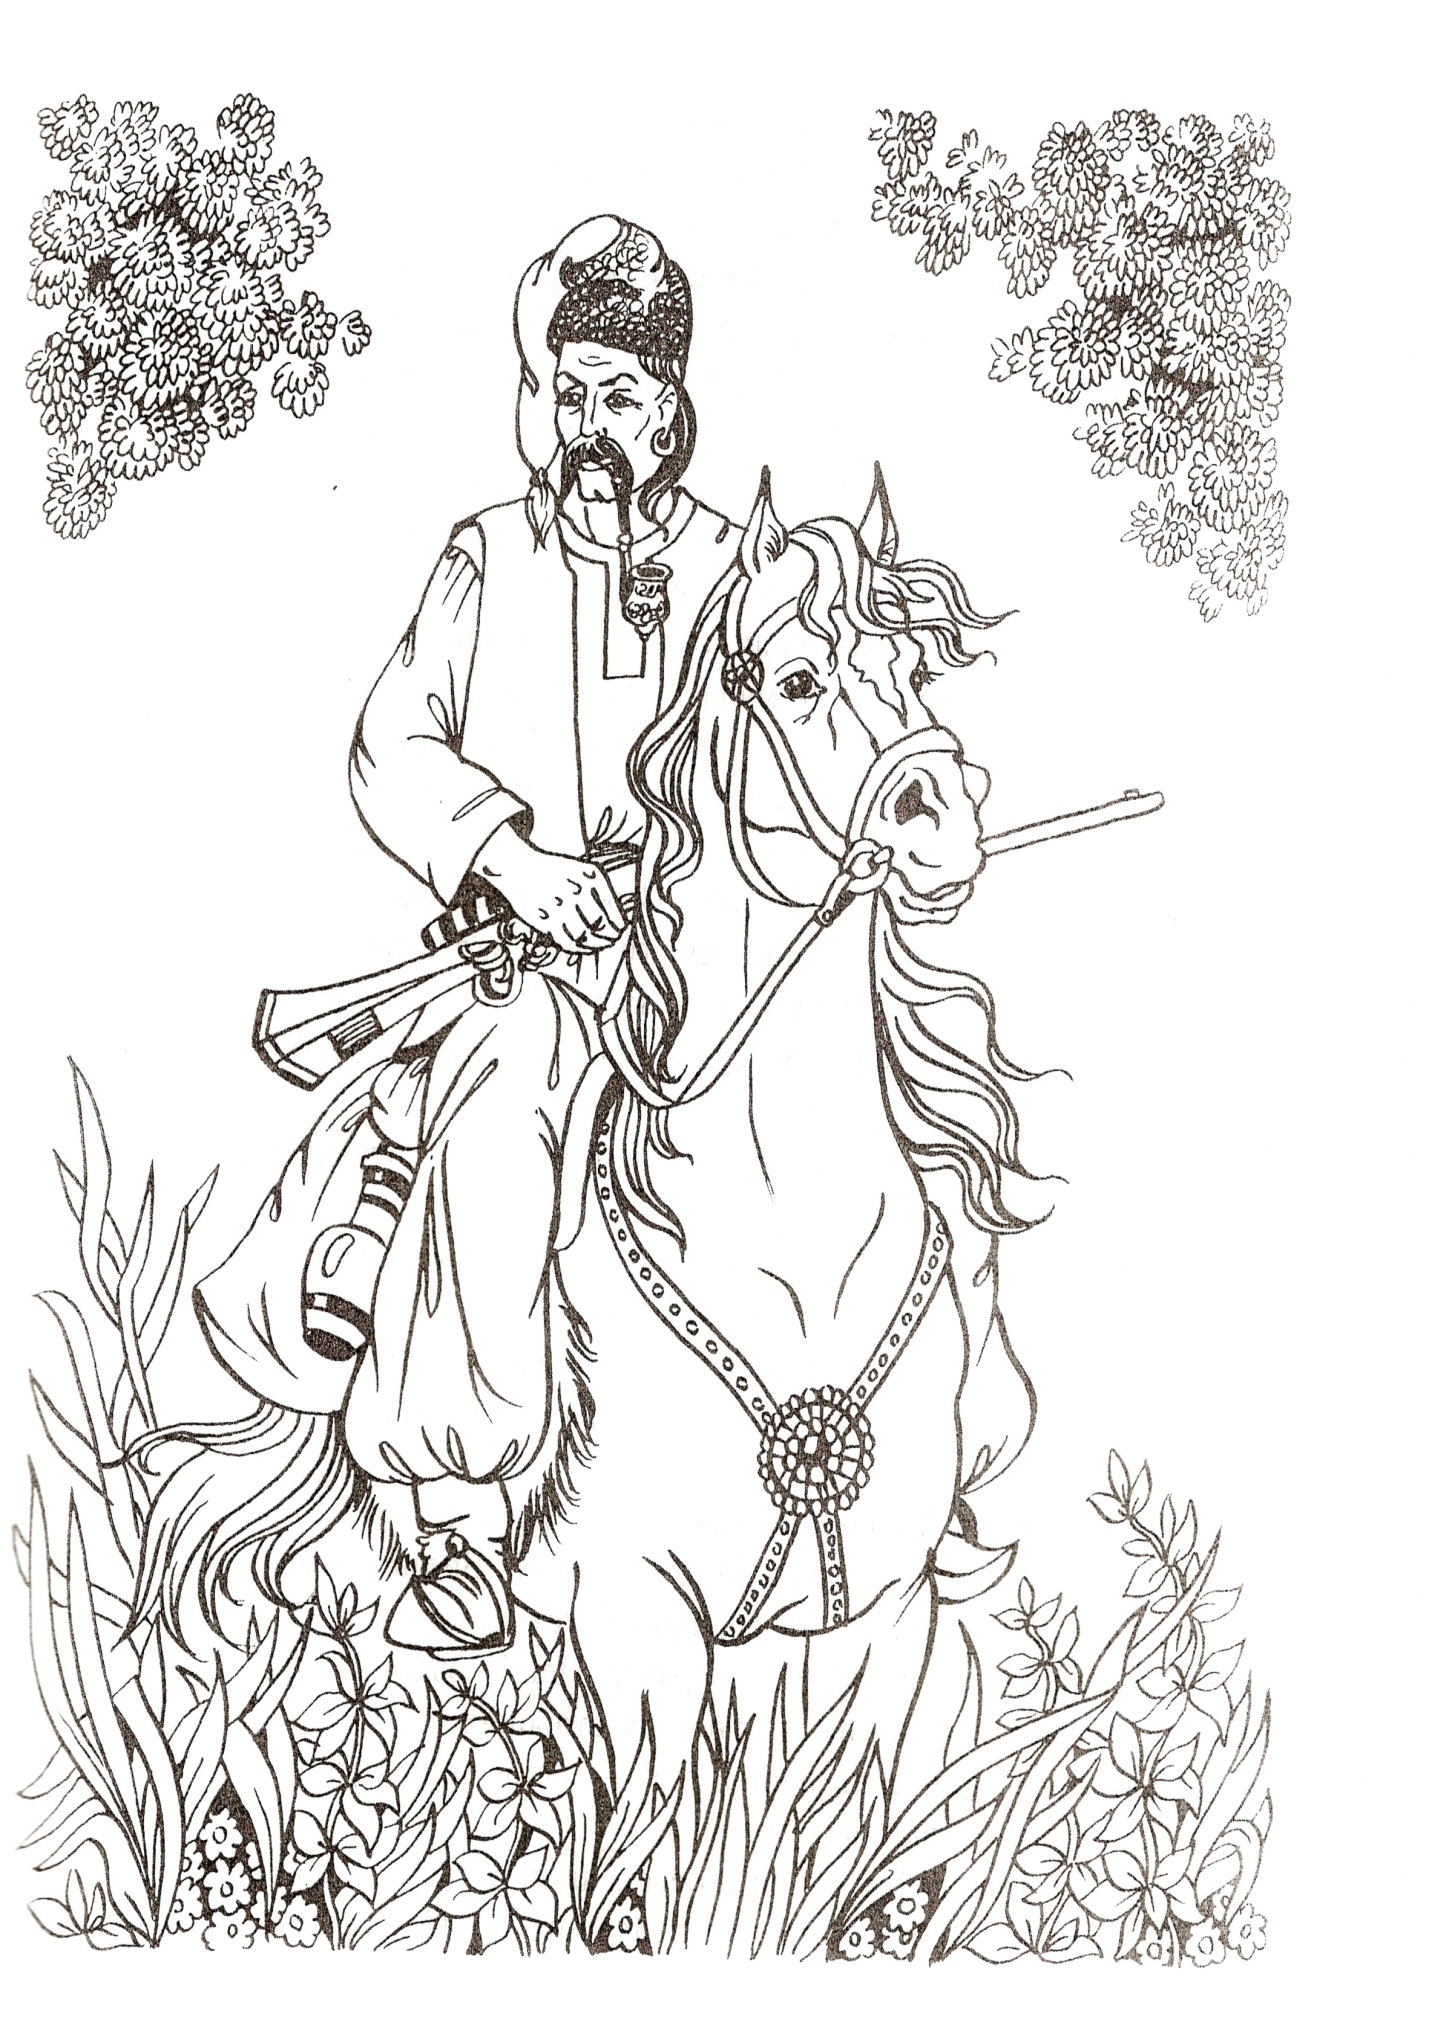 Cossack in the forest